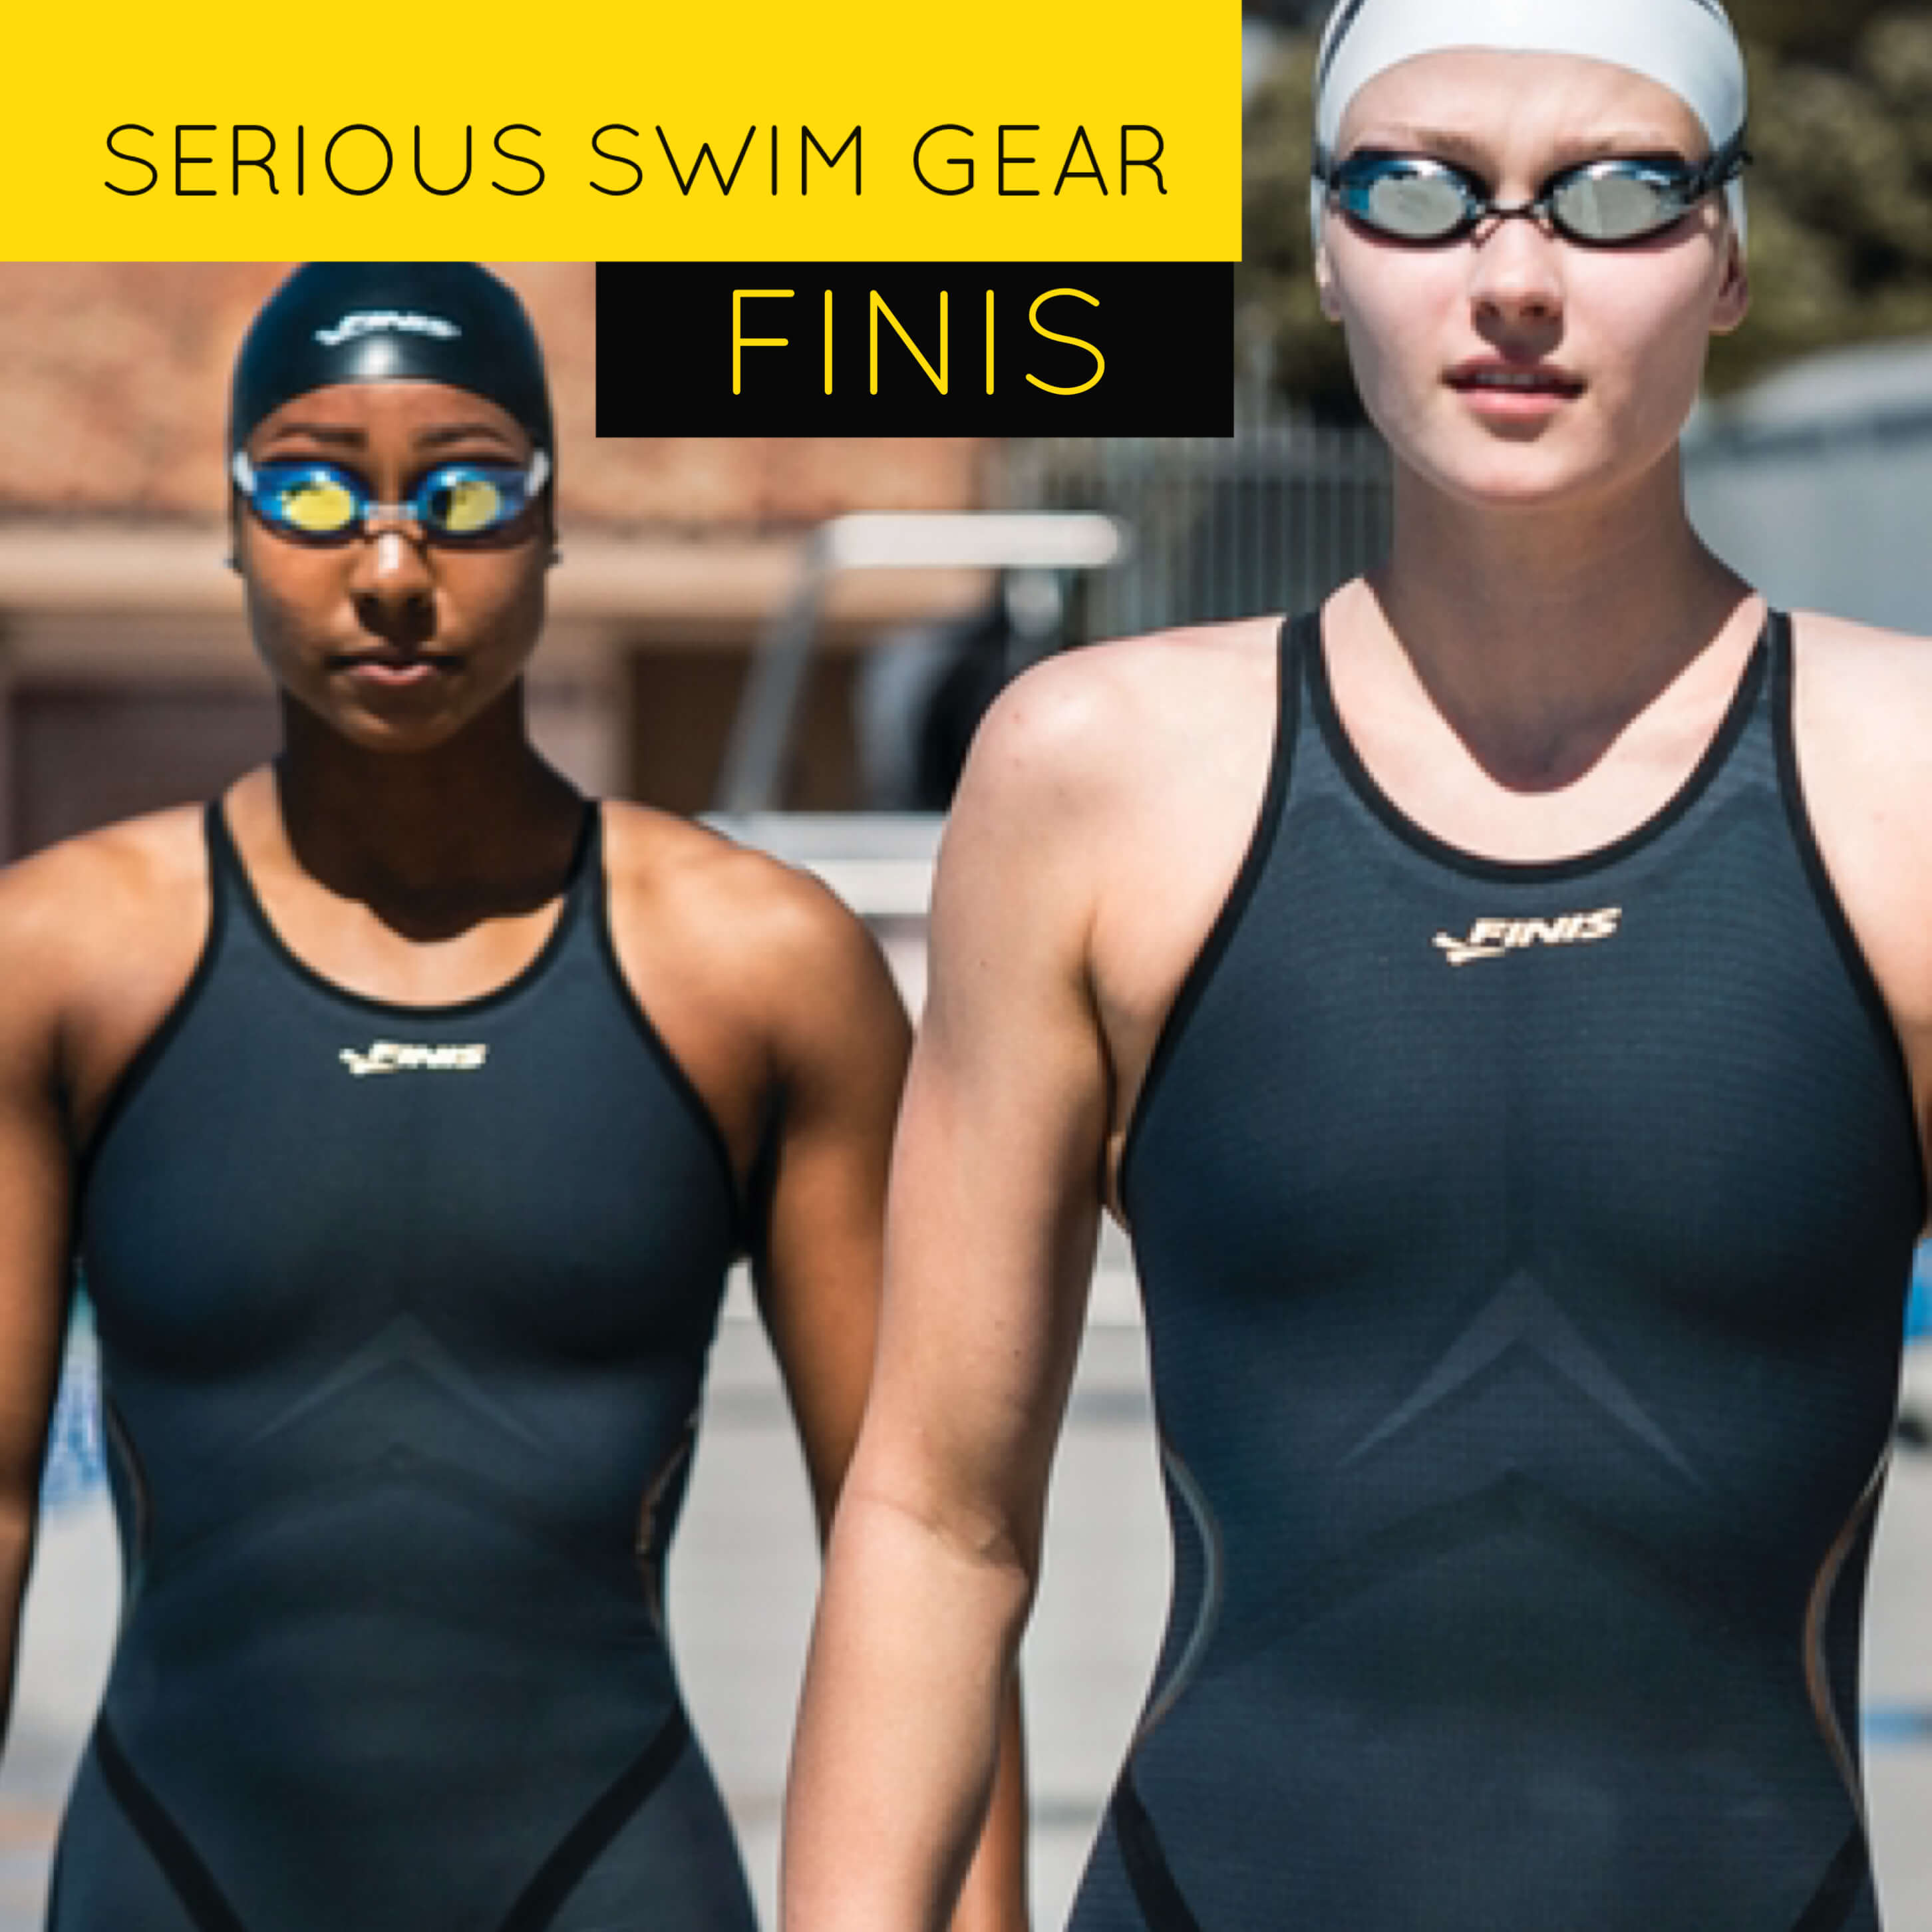 FINIS develops serious swim equipment to help competitive swimmers achieve their best